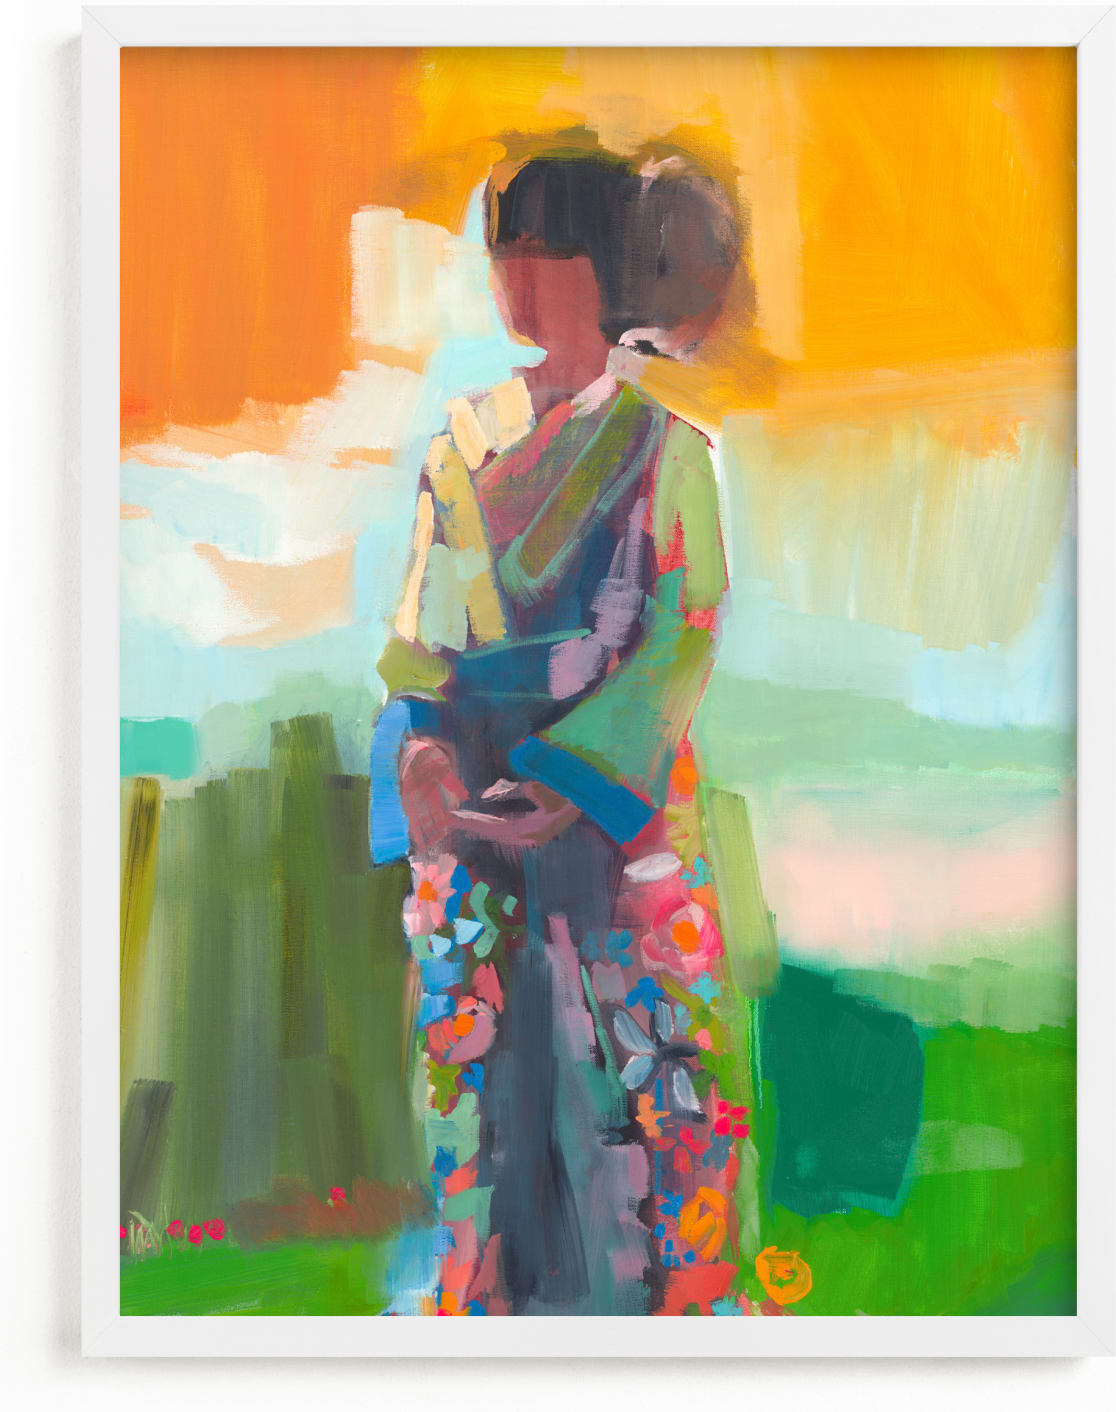 This is a colorful art by Jenny Westenhofer called kimono.